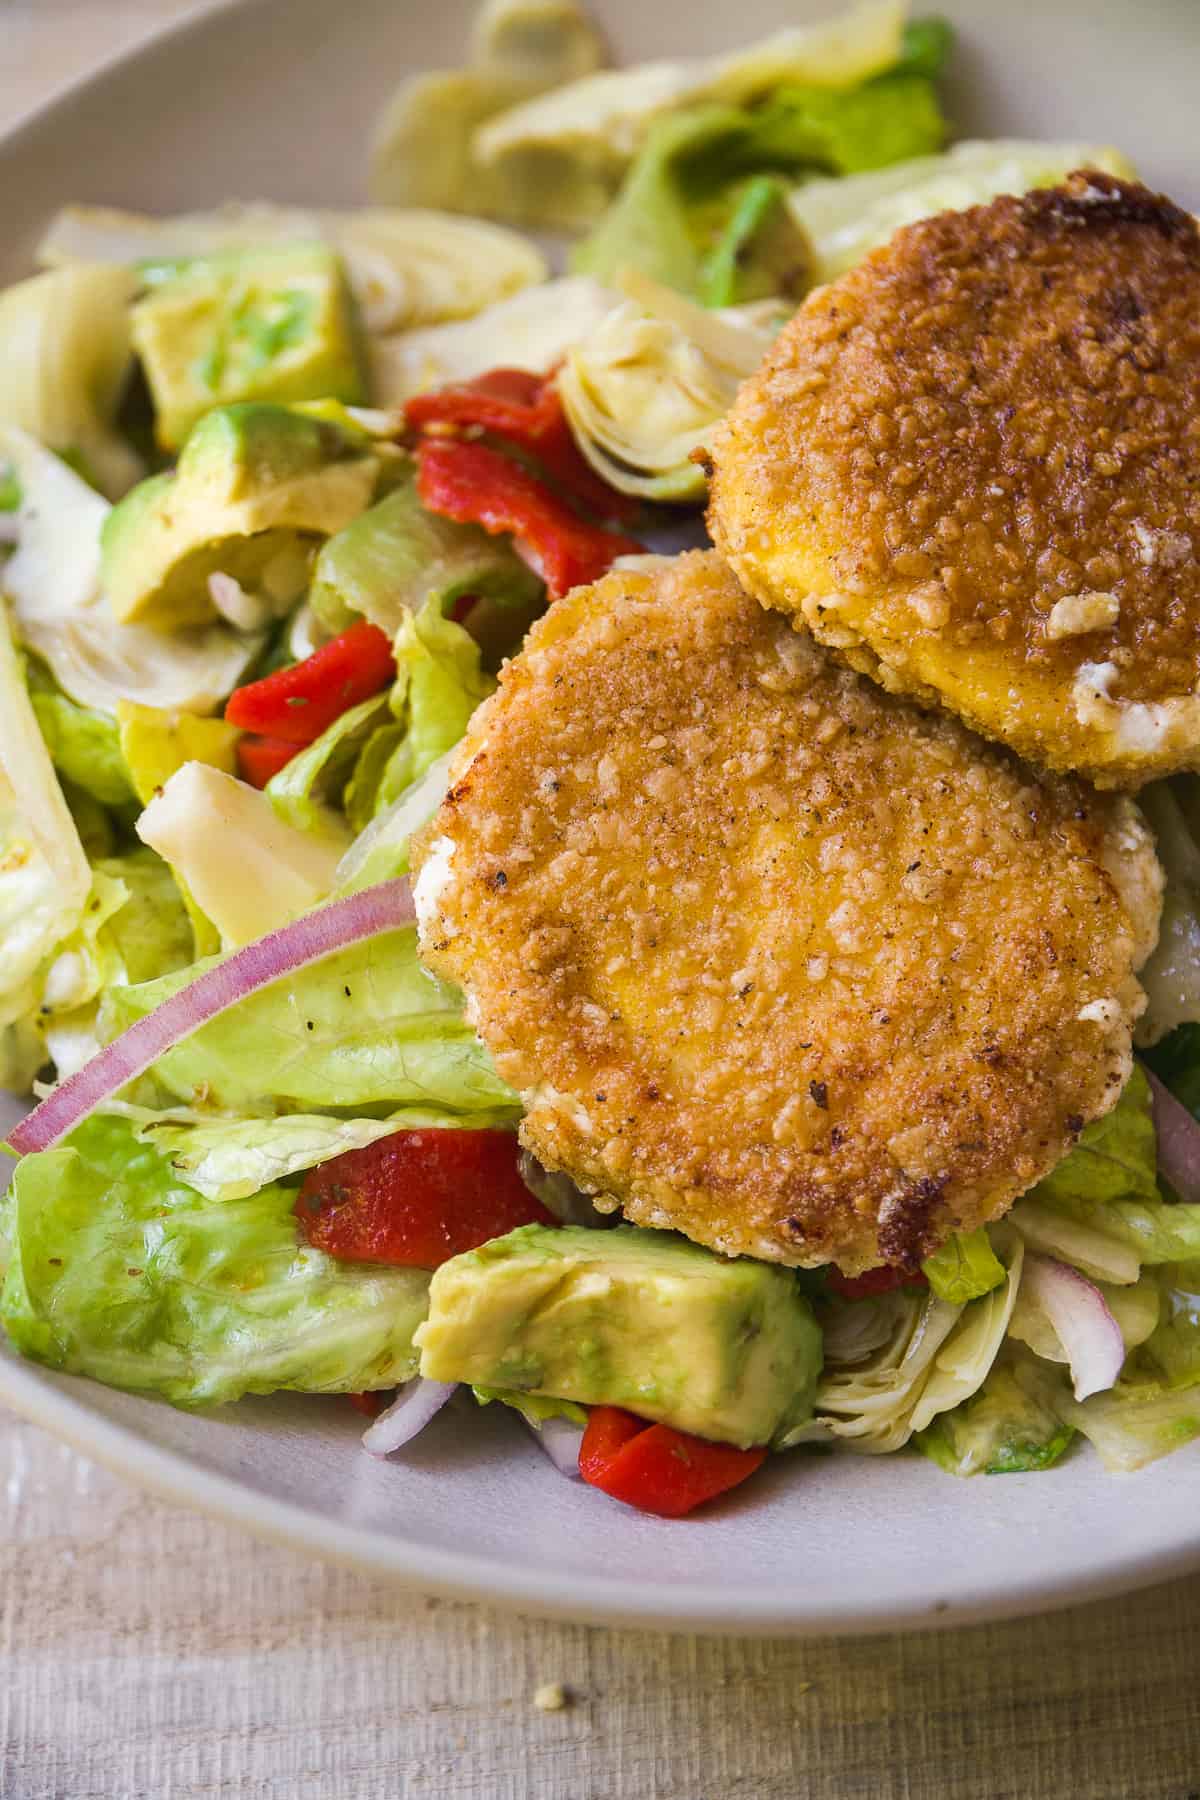 Salad tossed in dressing with two fried goat cheese patties.